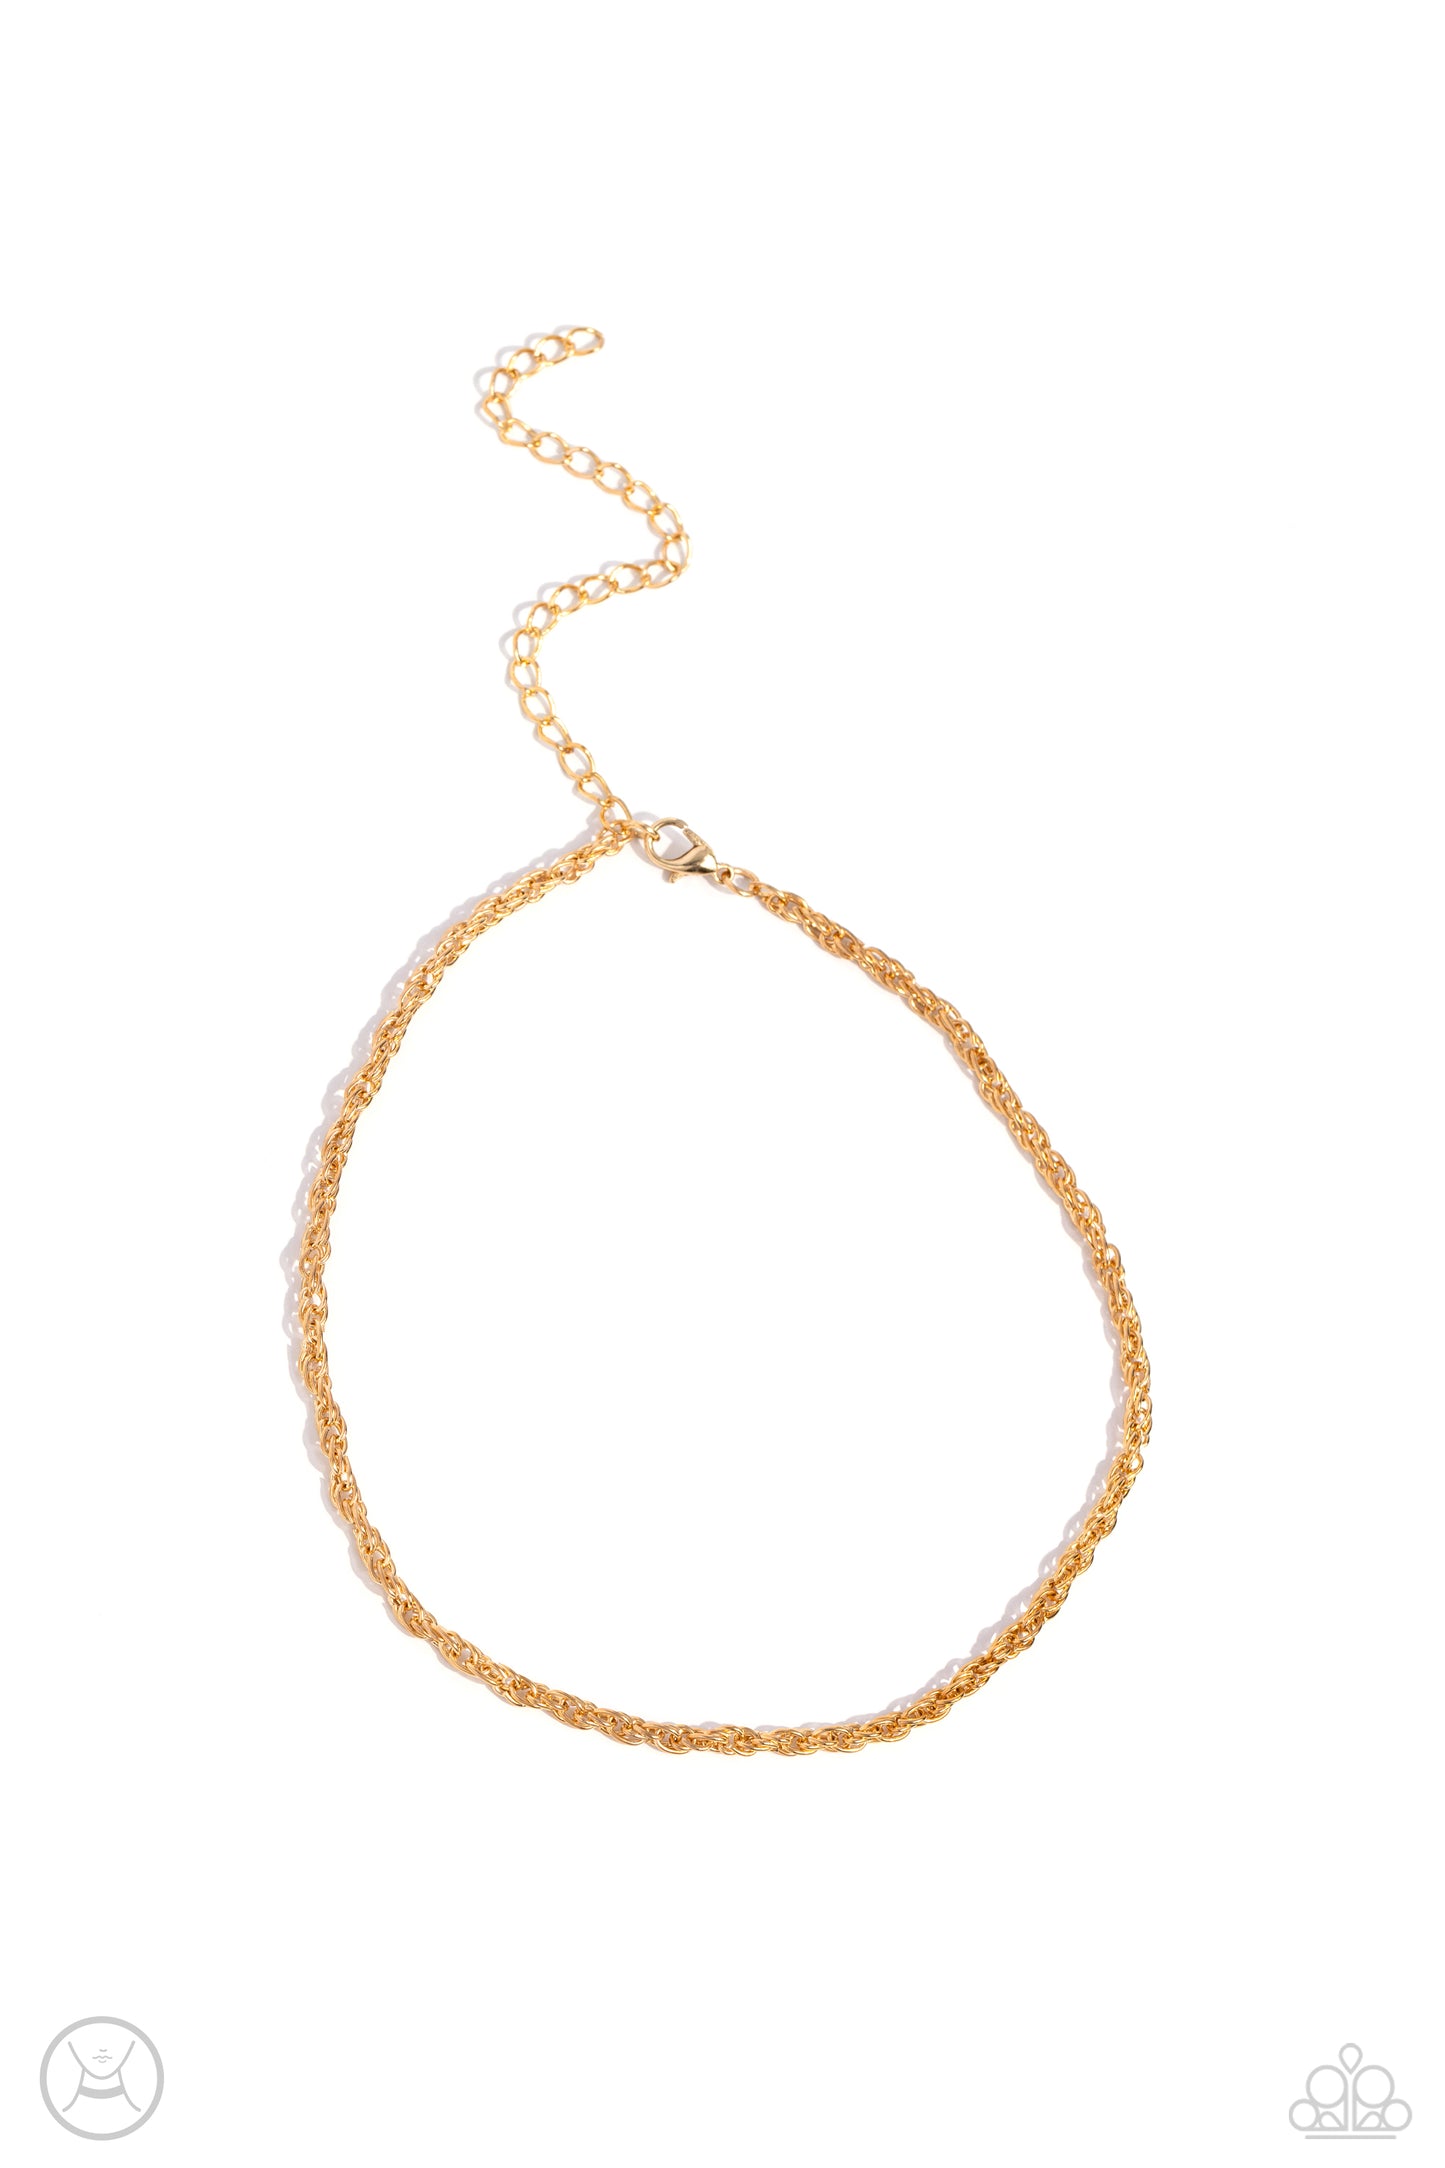 Glimmer of ROPE - Gold Choker